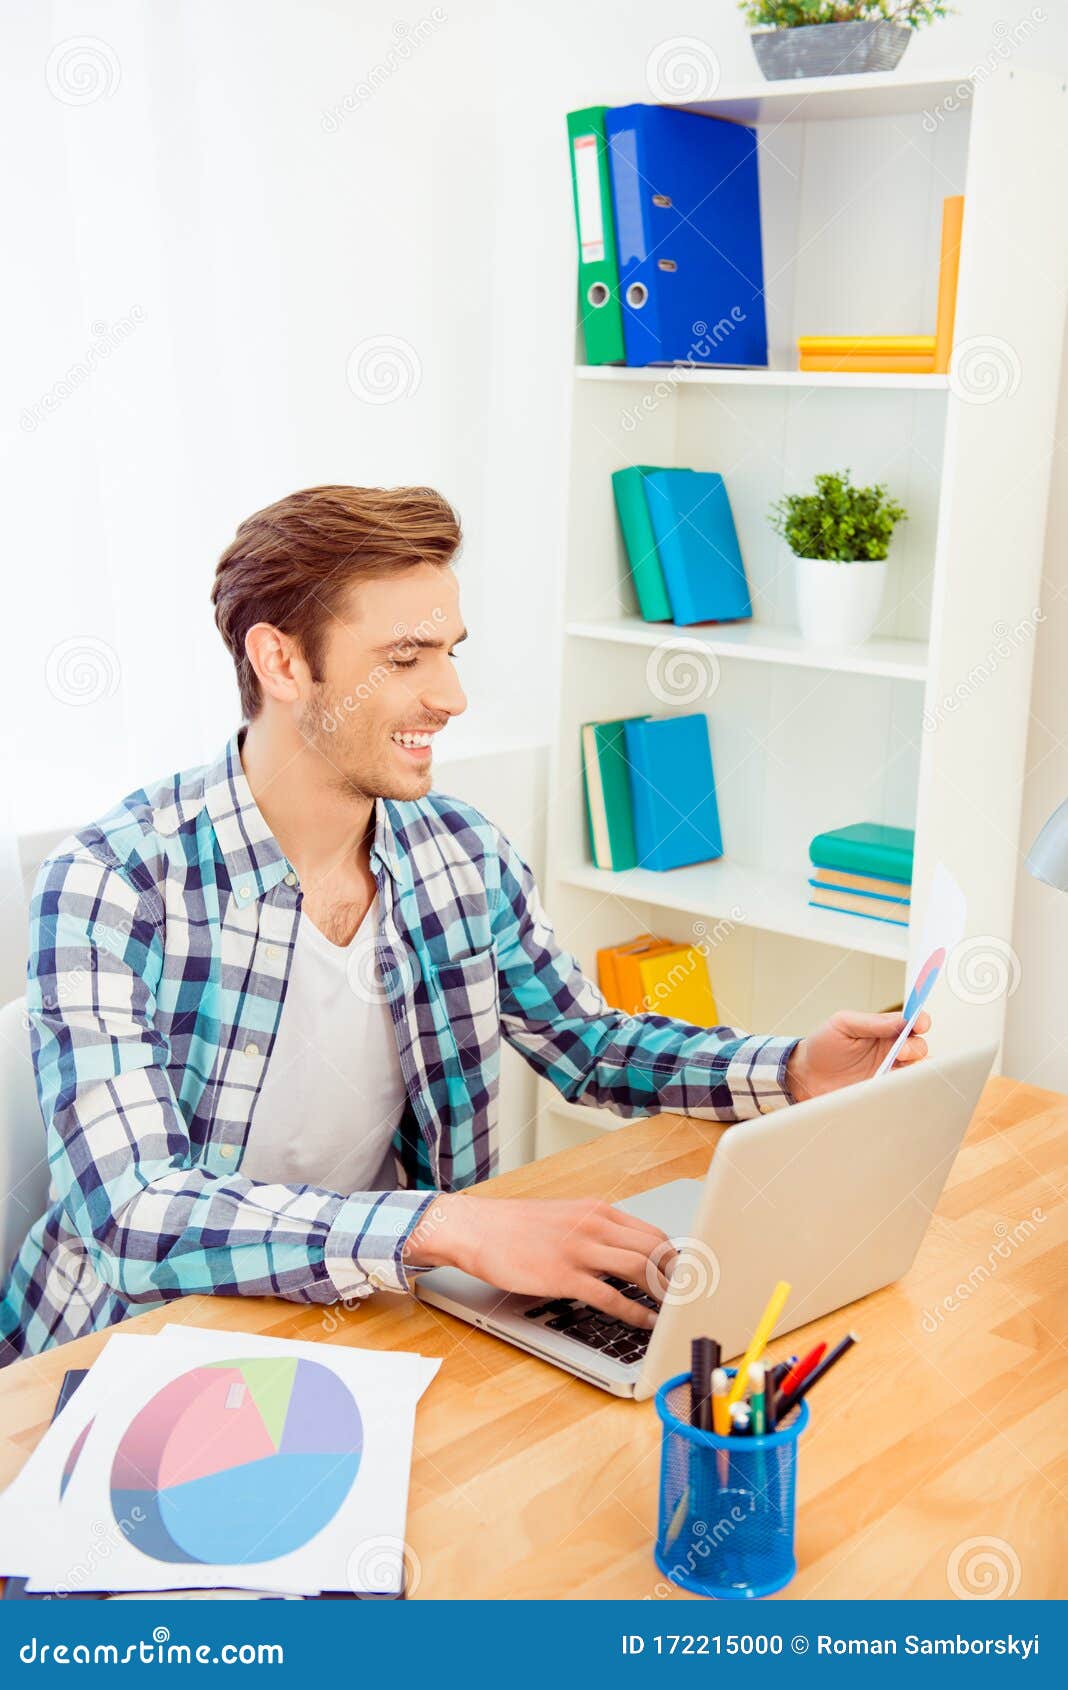 portrait of happy young man working with laptop and diagrama